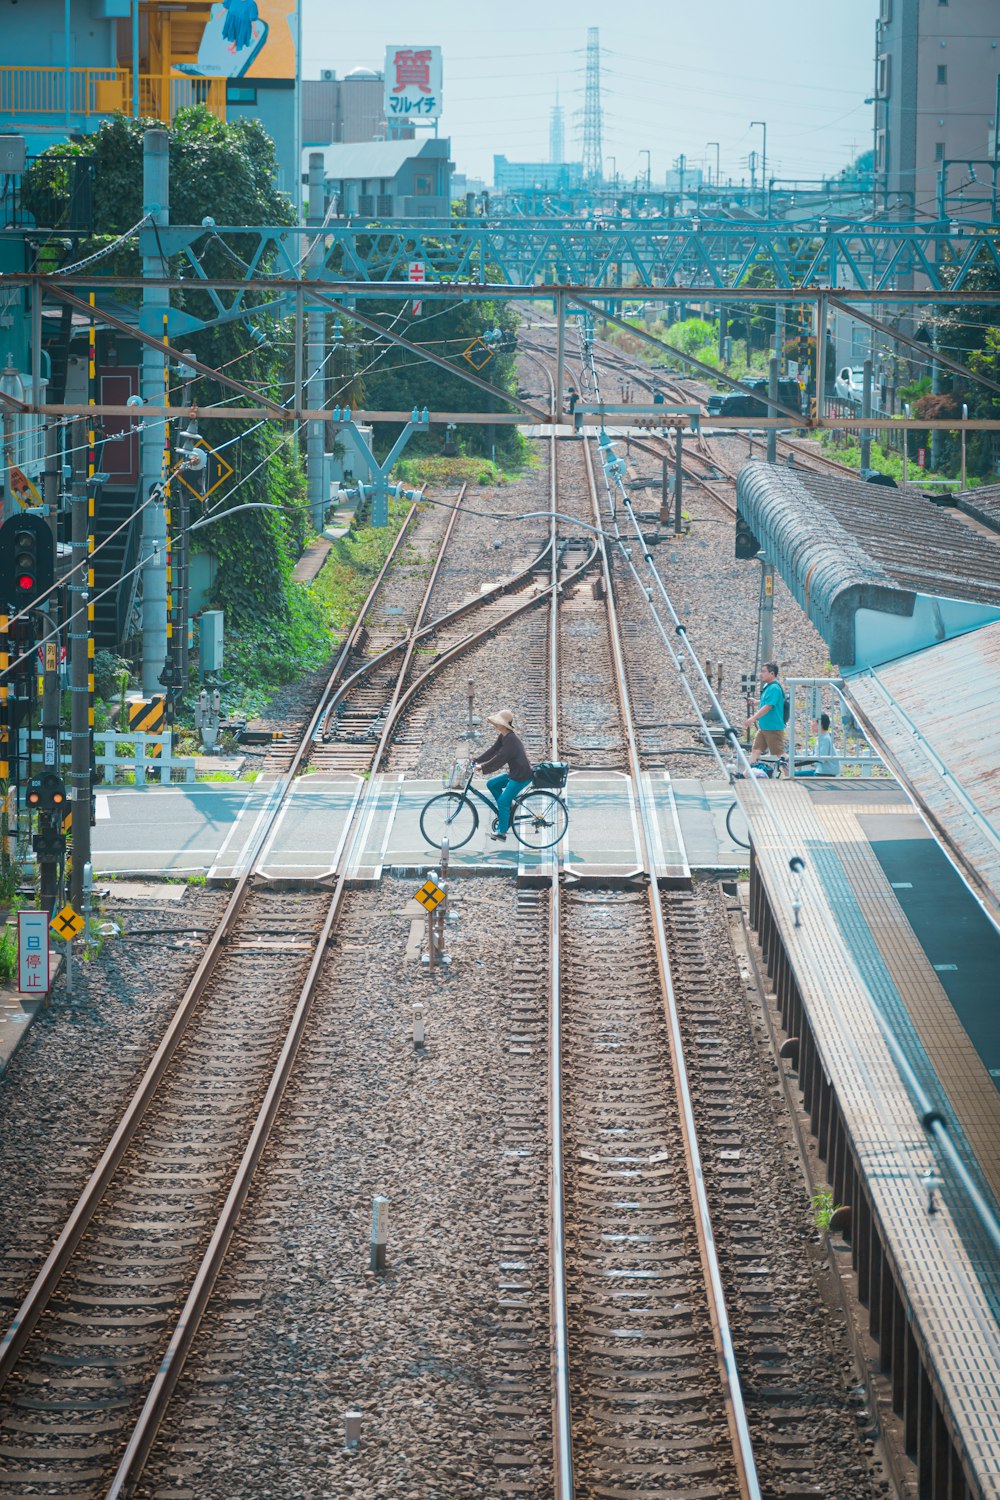 a person riding a bike on a train track